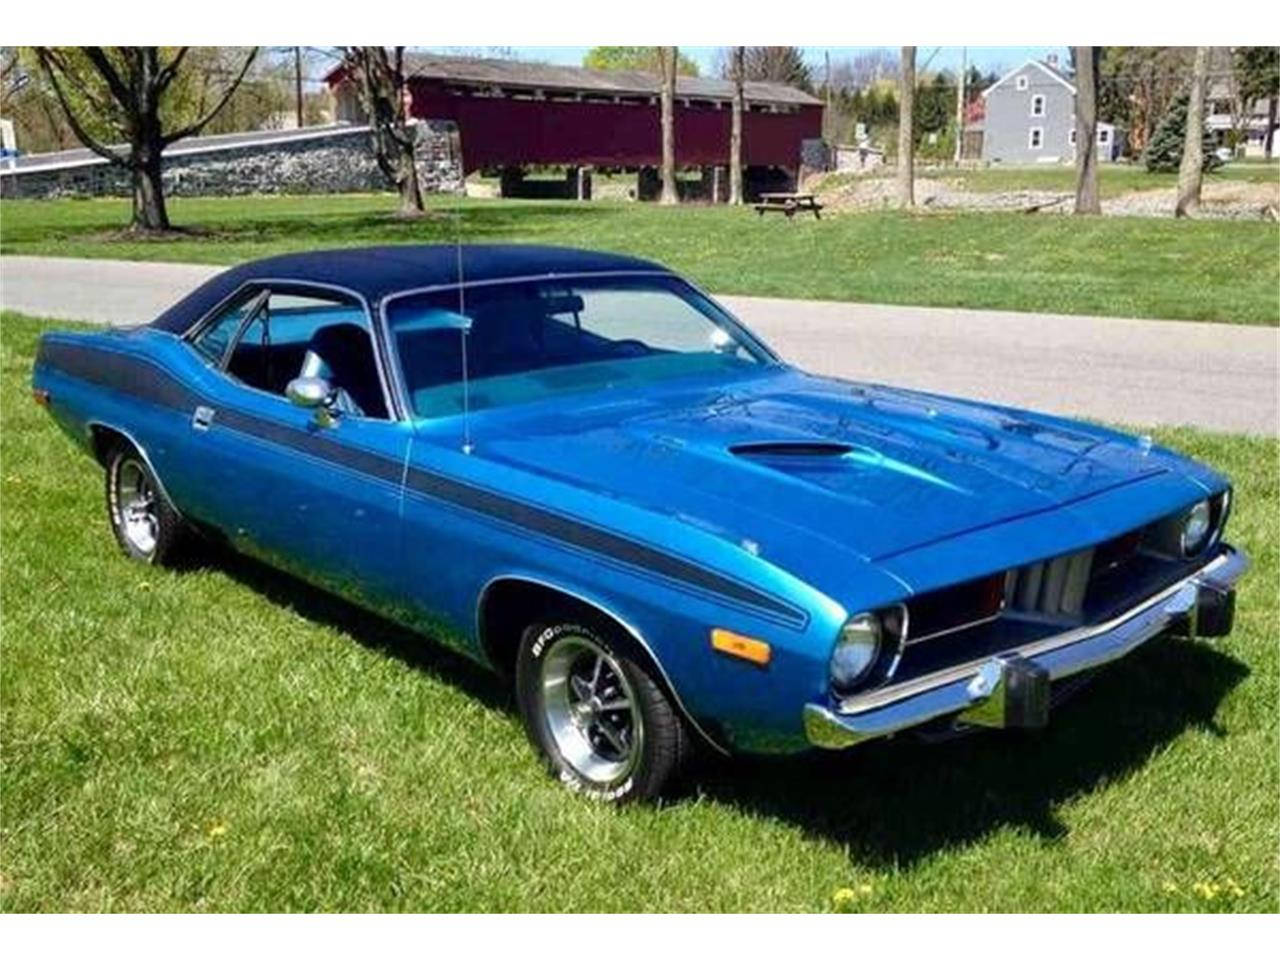 Blue Vintage Plymouth Barracuda On Grass Background